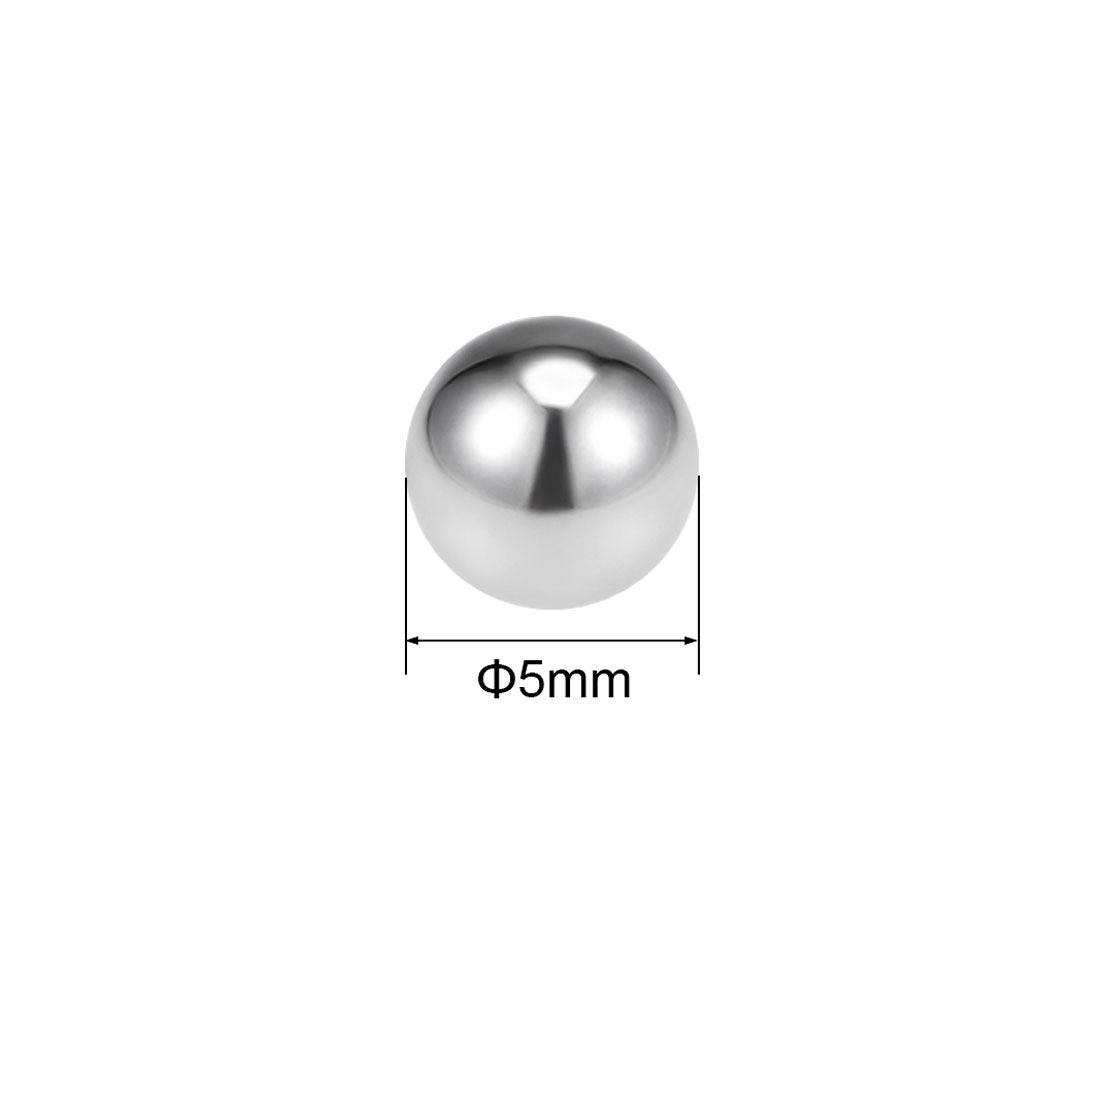 Uxcell Uxcell 4mm Bearing Balls 316L Stainless Steel G100 Precision Balls 100pcs